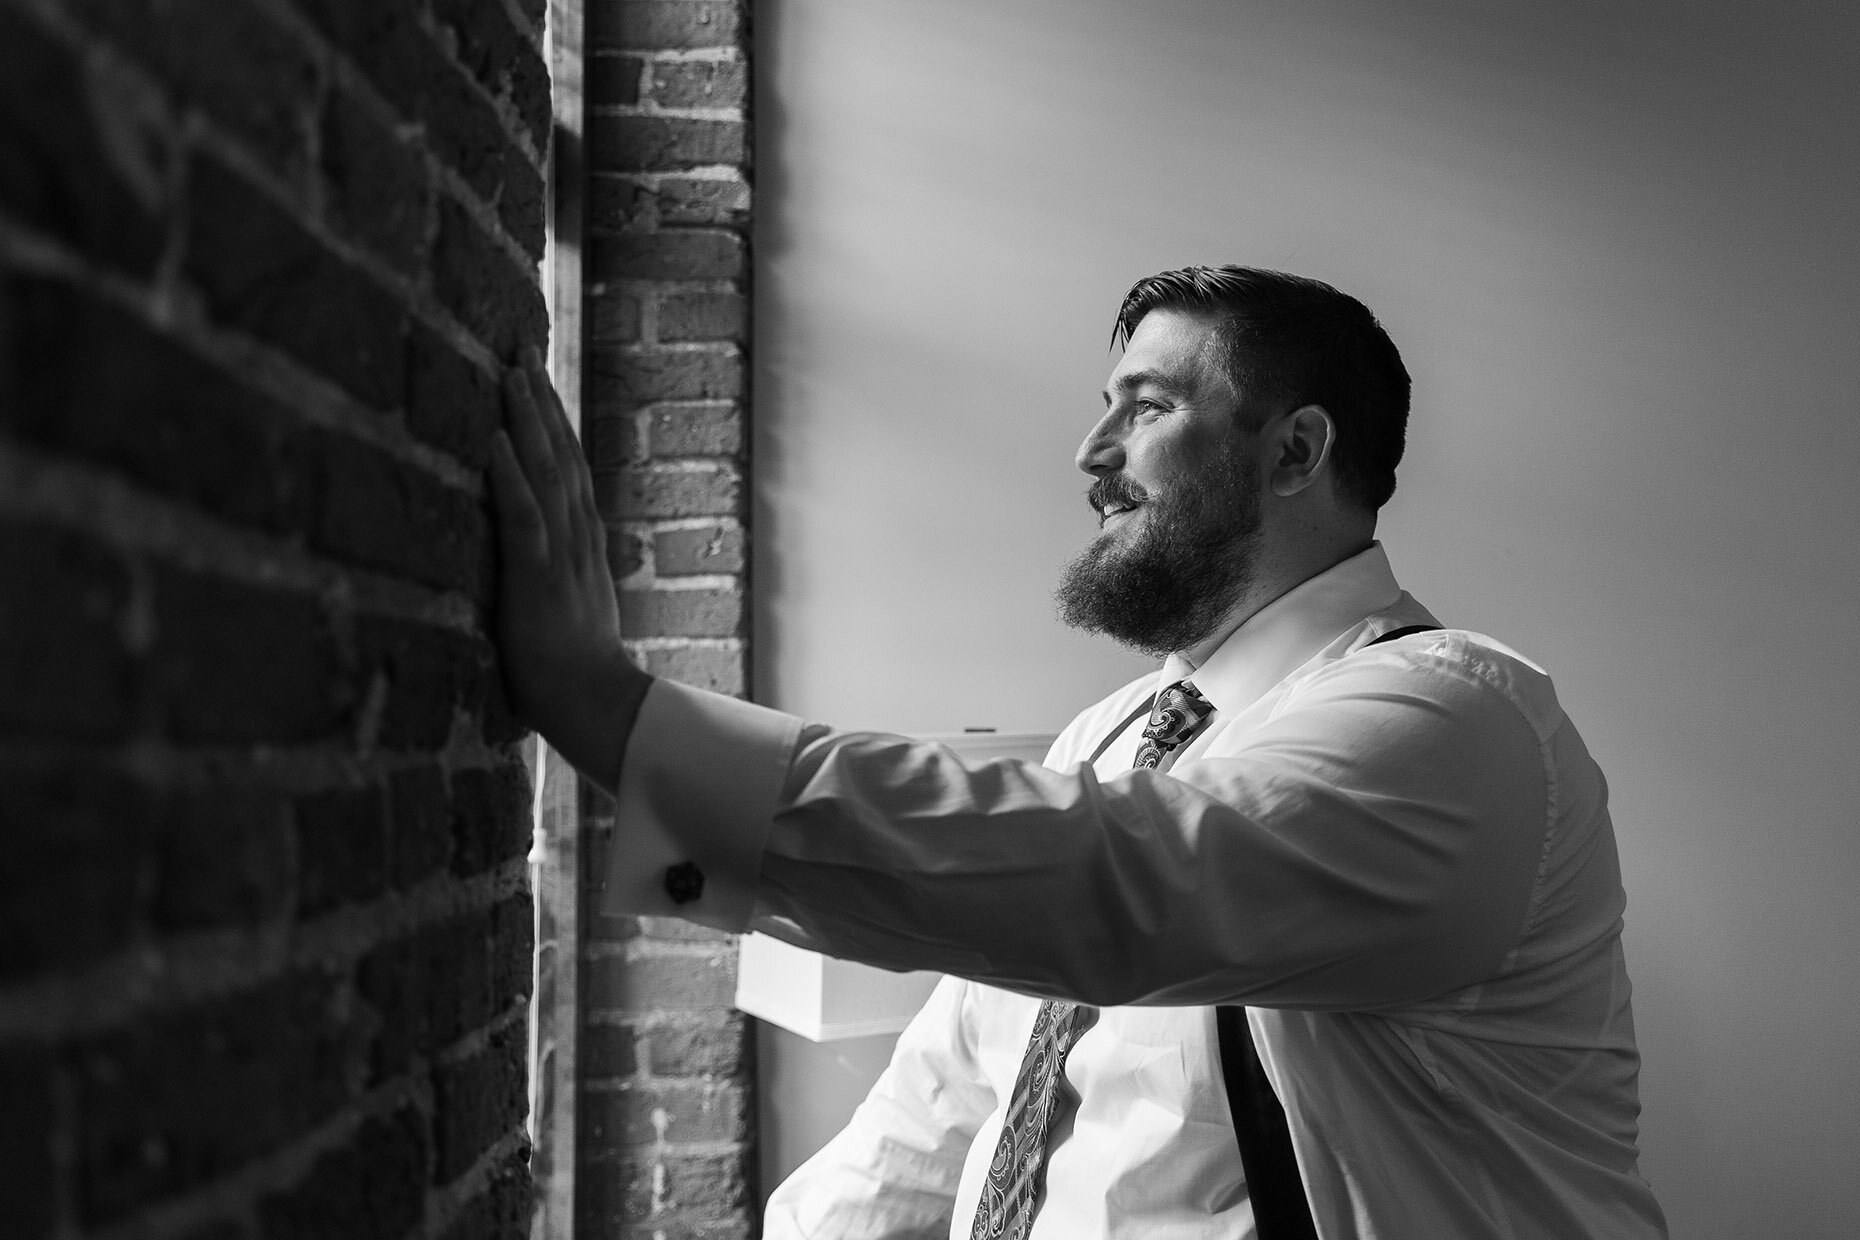 Groom looking out a window in black and white